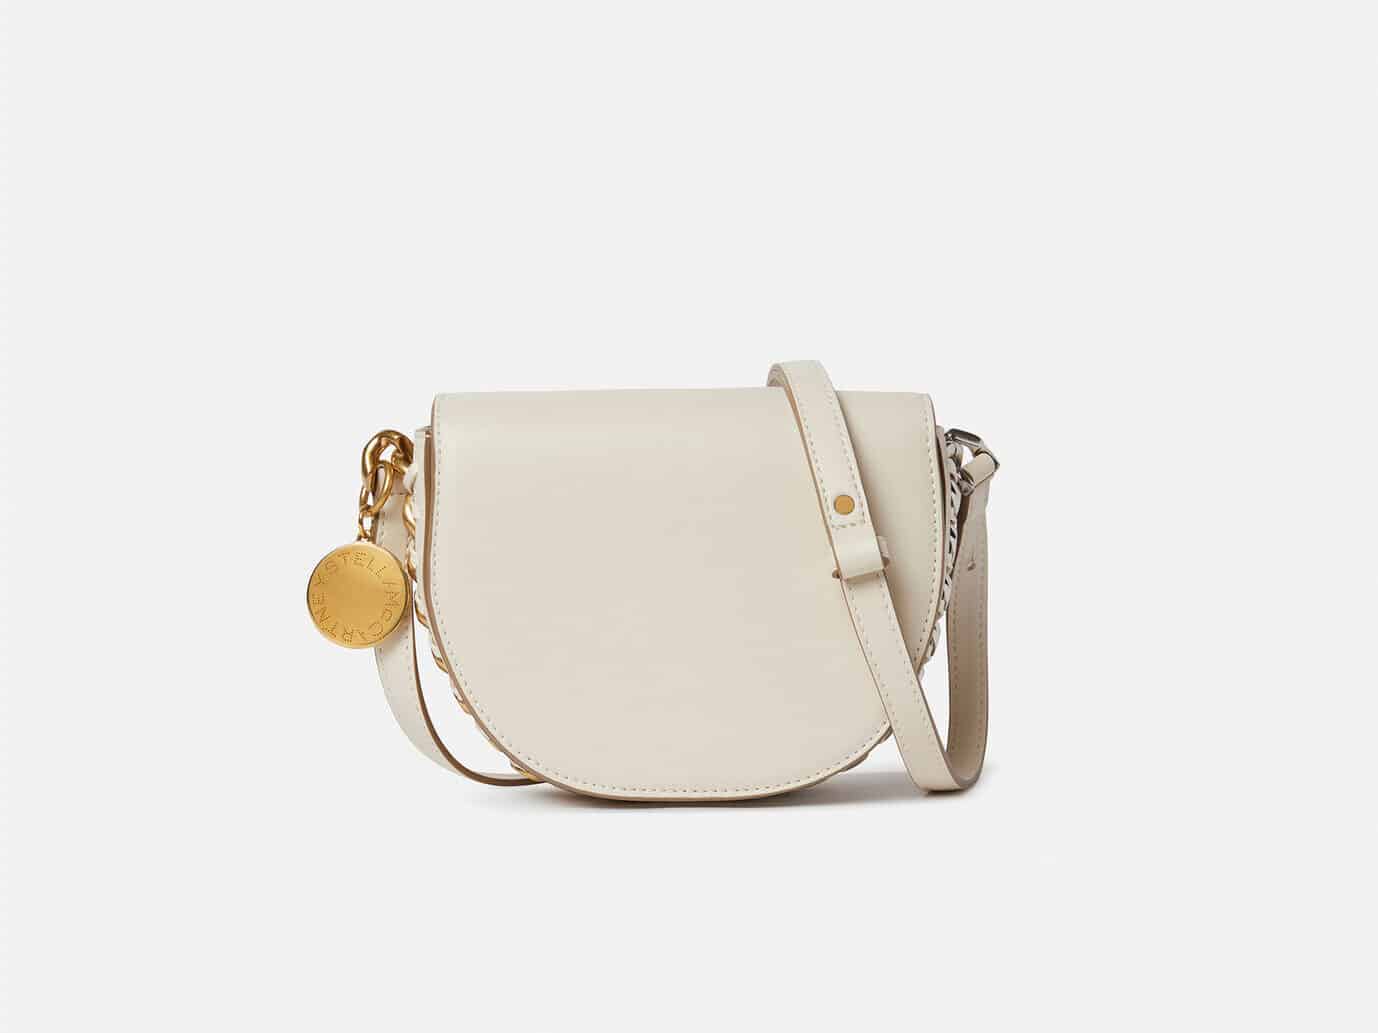 White vegan leather Stella McCartney shoulder bag with signature gold and silver chain